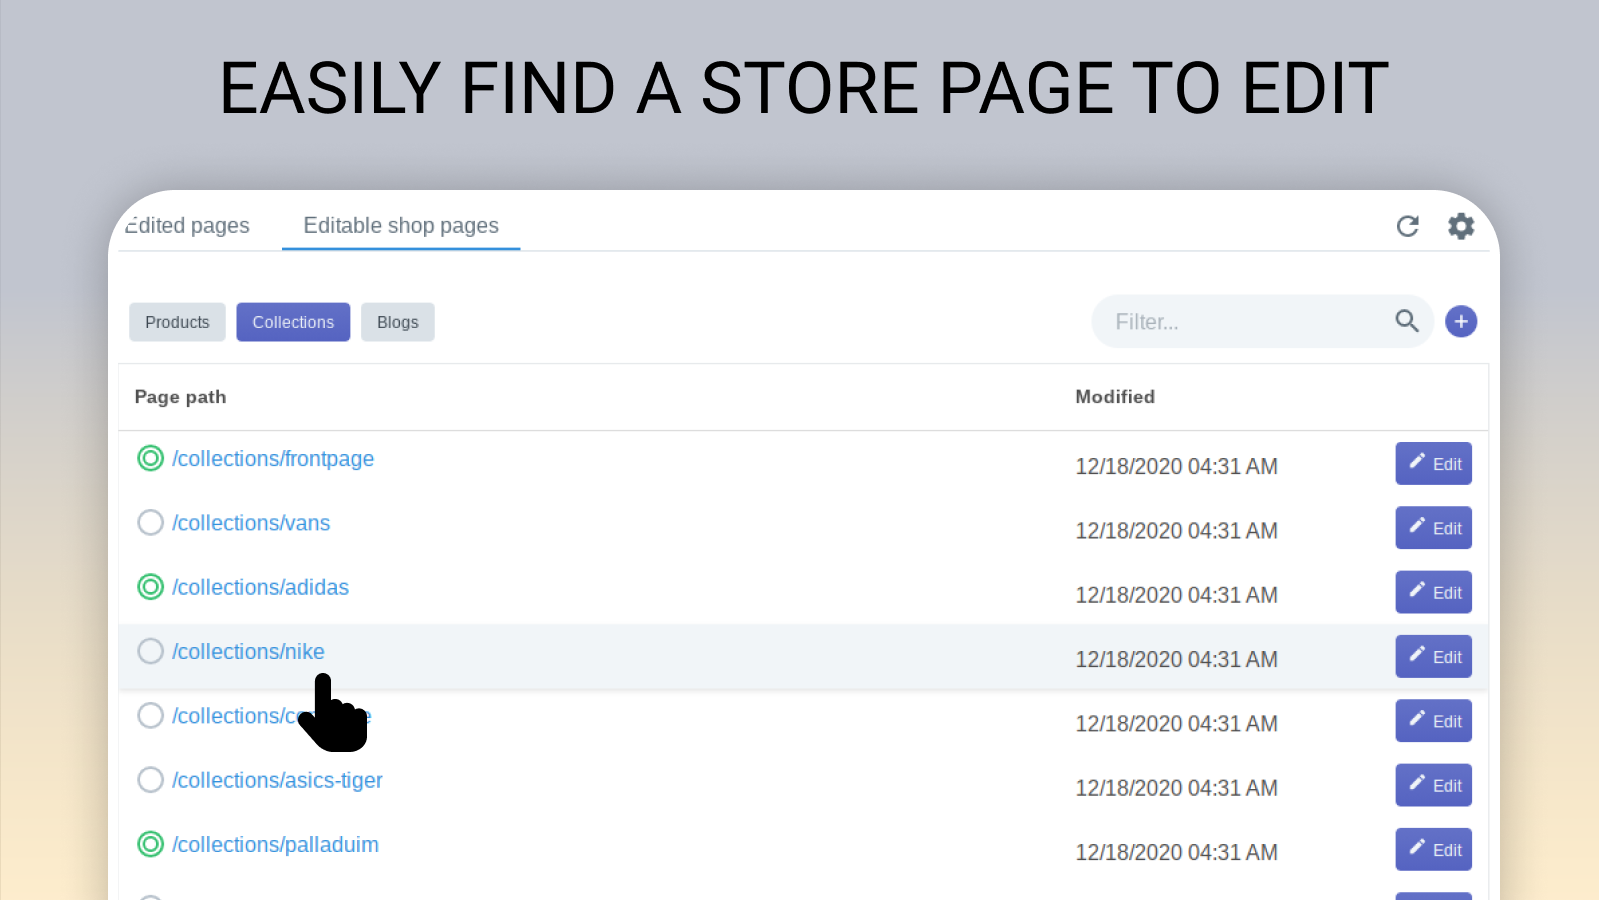 Find a page to edit from your store public pages